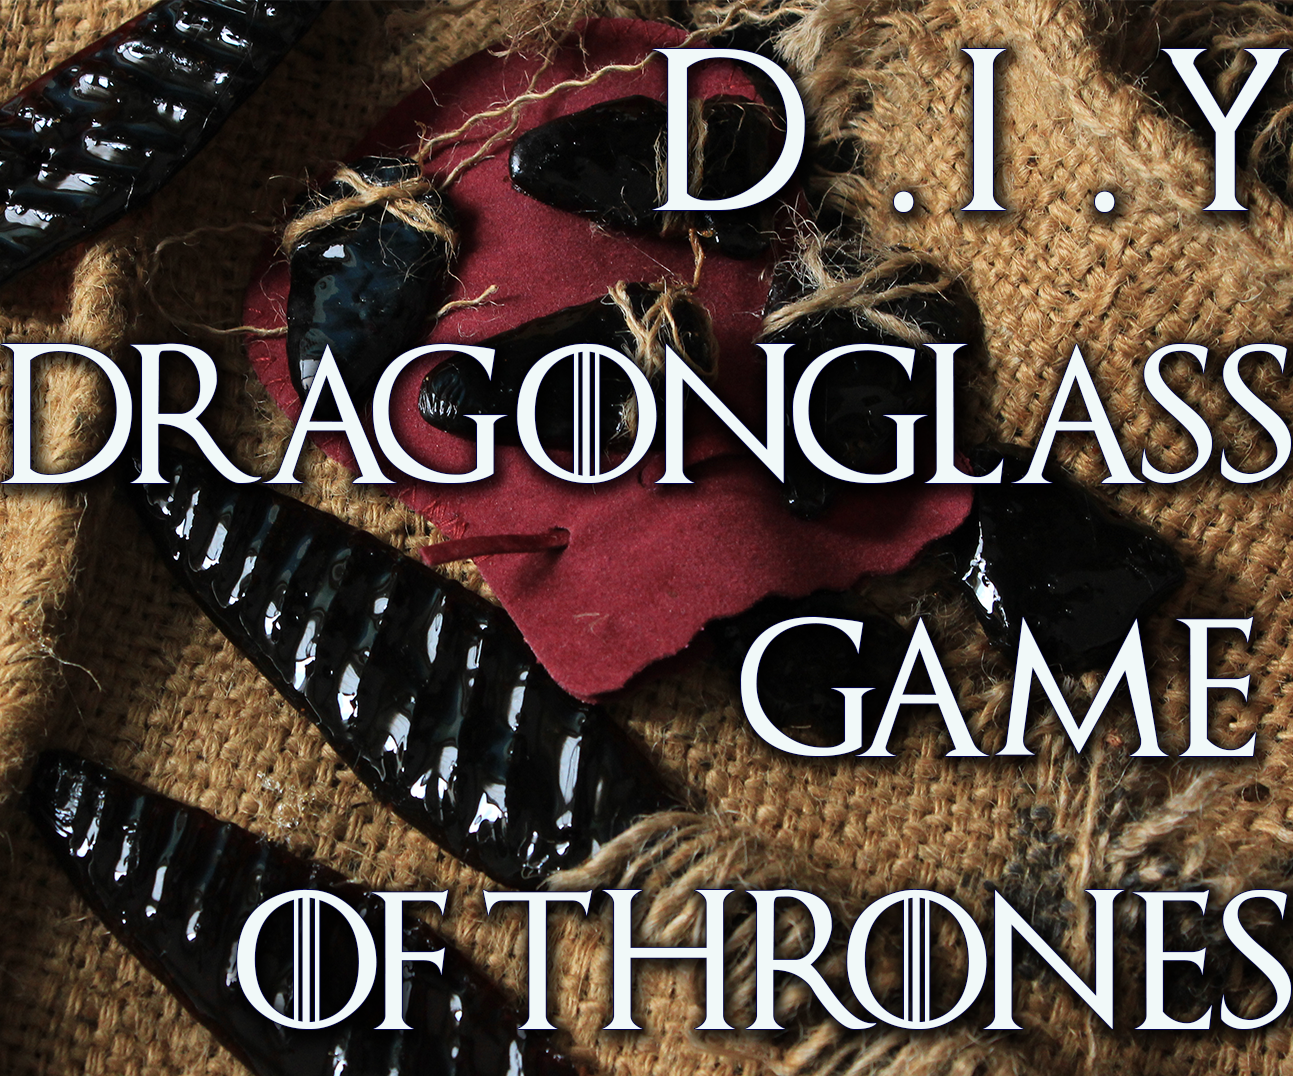 How to Make Dragonglass From Game of Thrones 